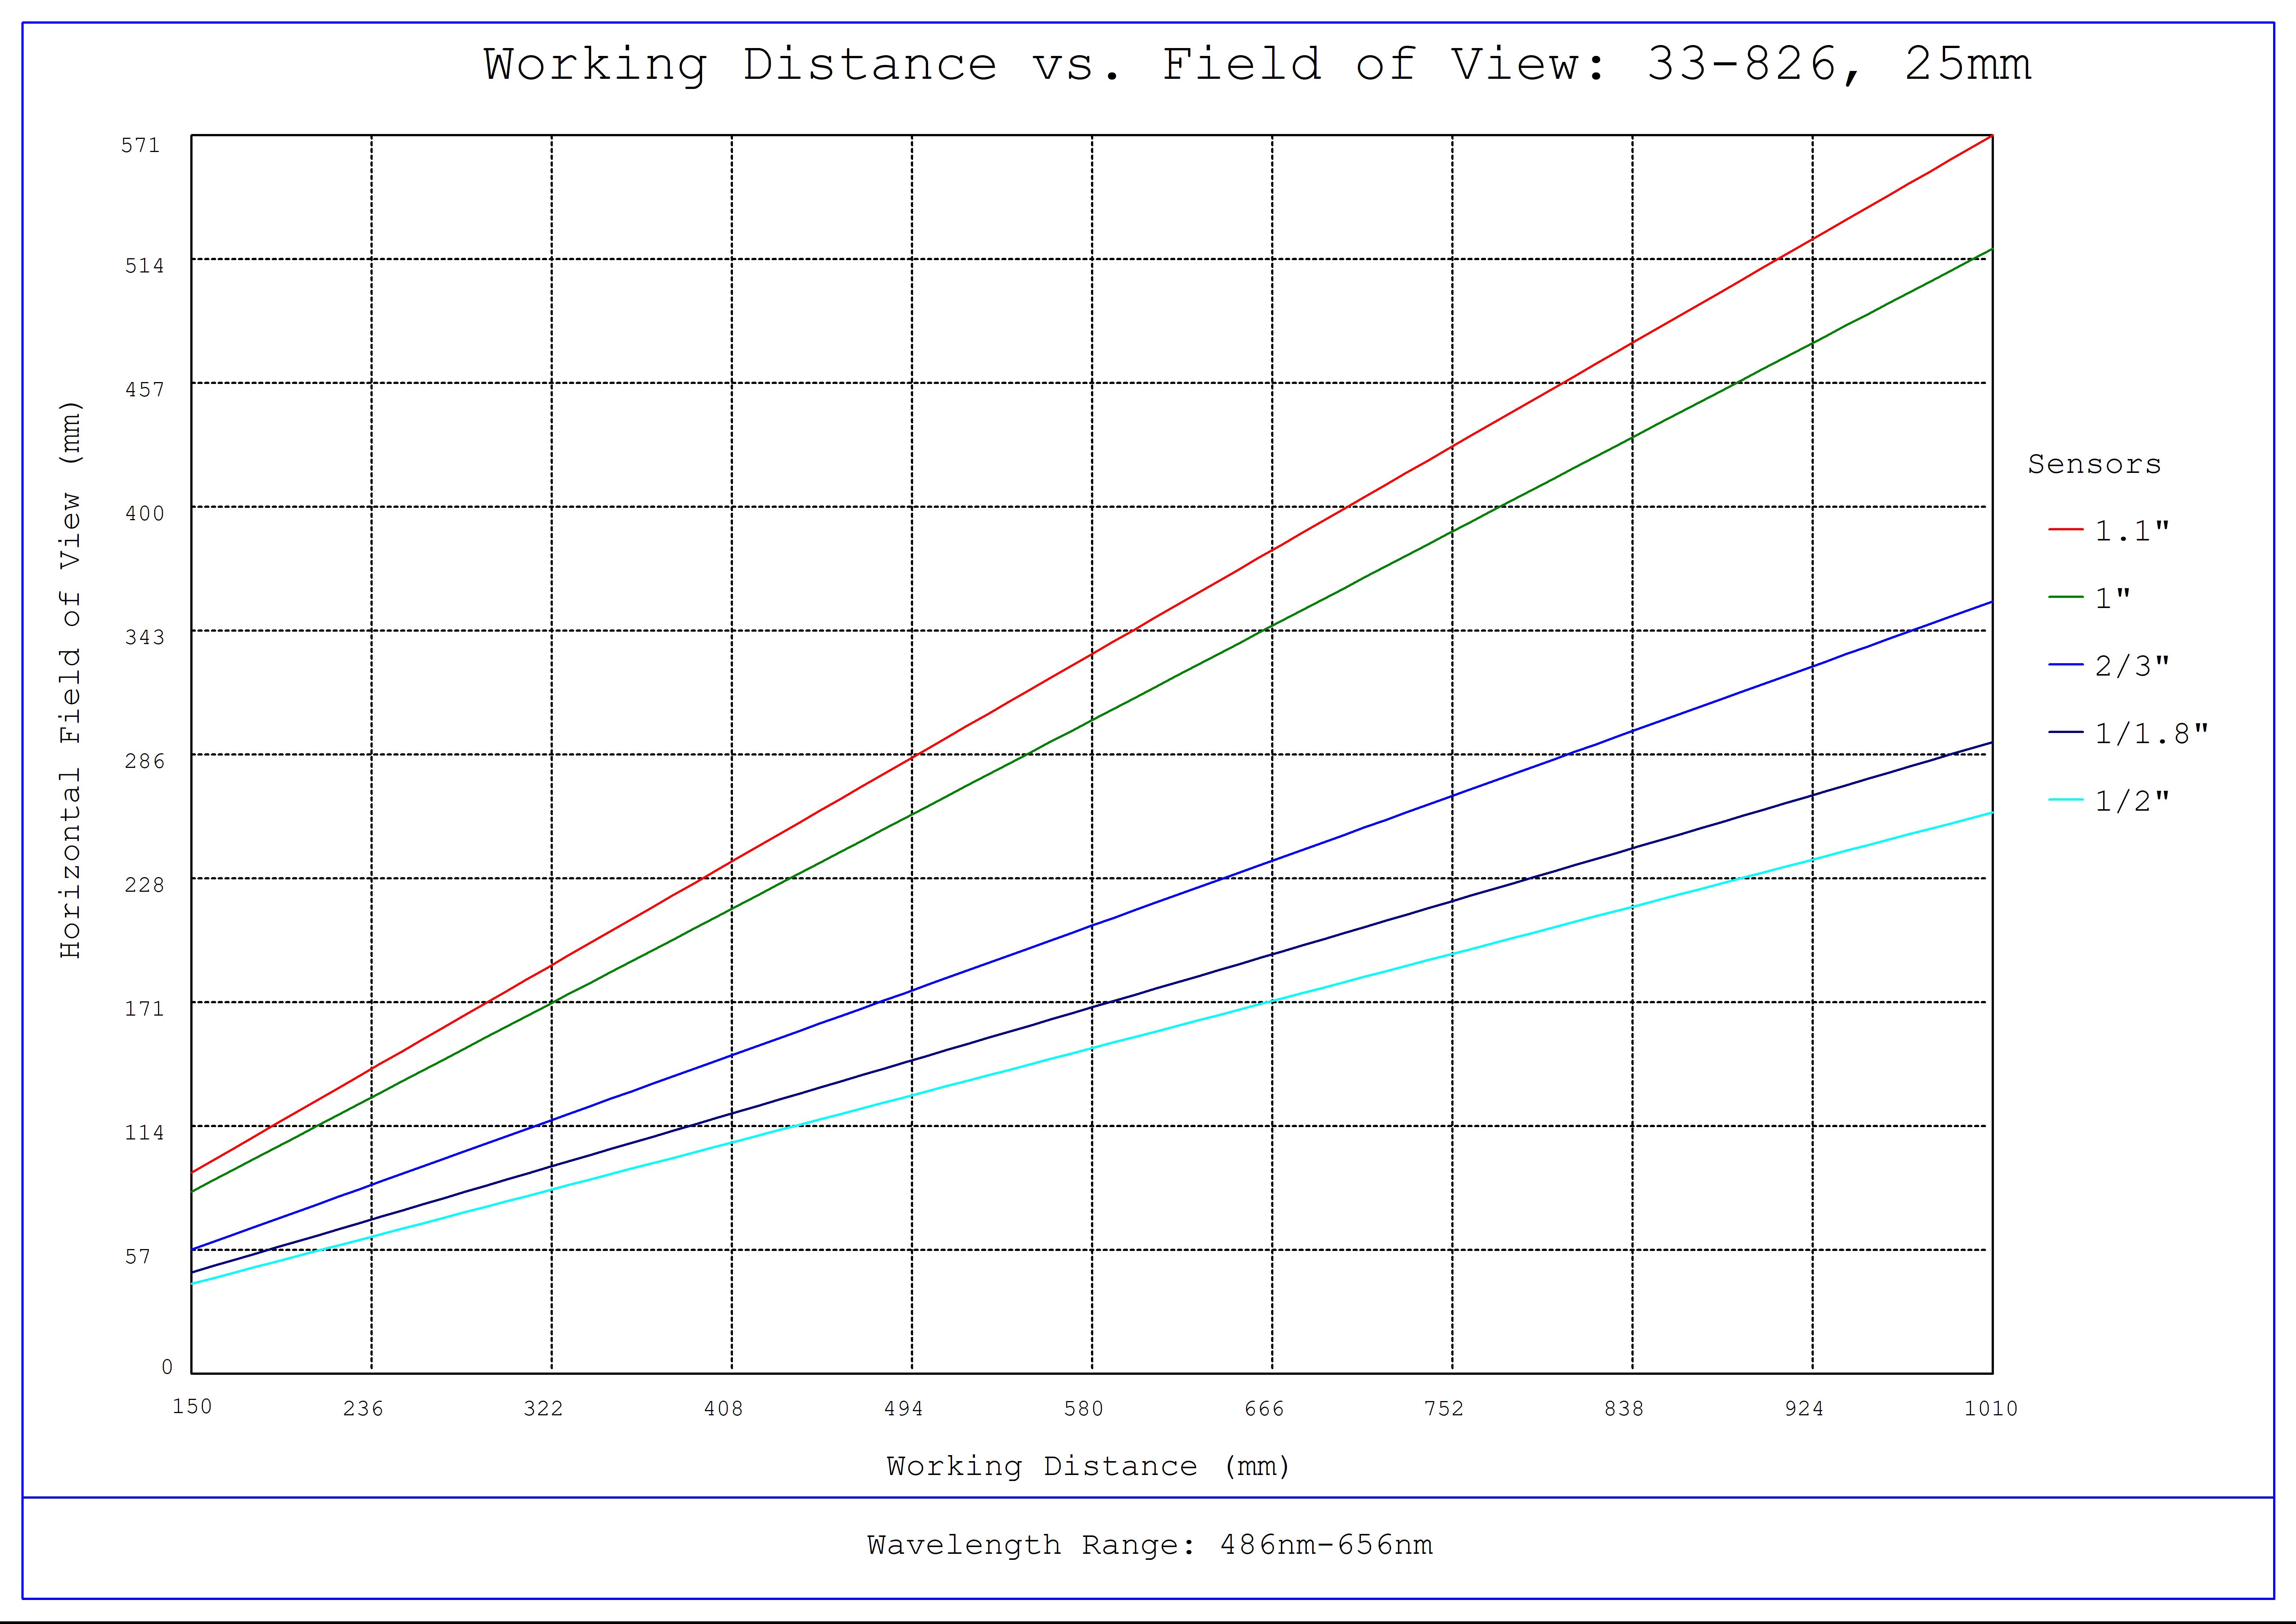 #33-826, 25mm f/8.0, HPi Series Fixed Focal Length Lens, Working Distance versus Field of View Plot